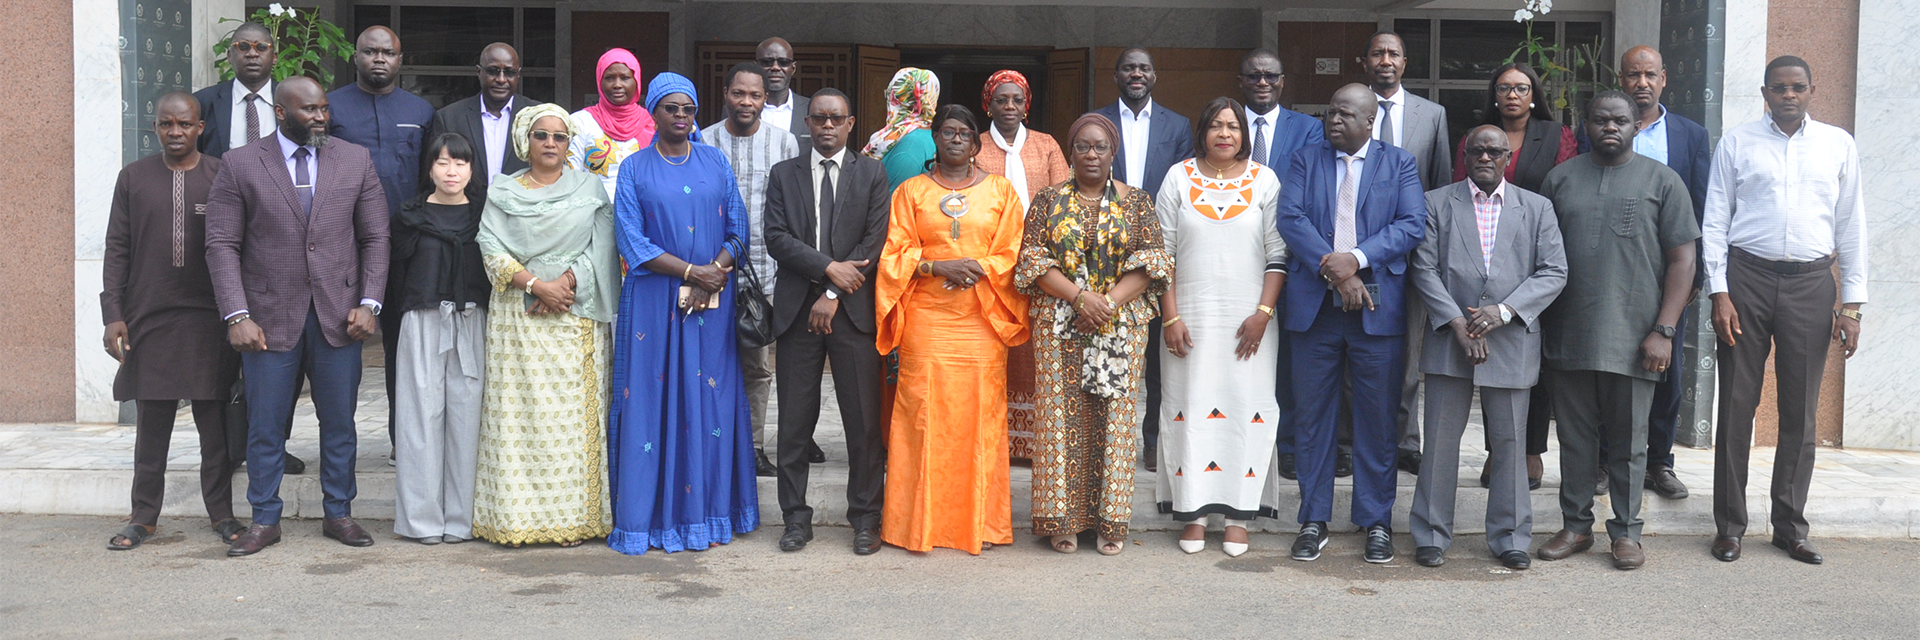 The United Nations and intergovernmental organizations in West Africa join forces for the sustainable development of the sub-region